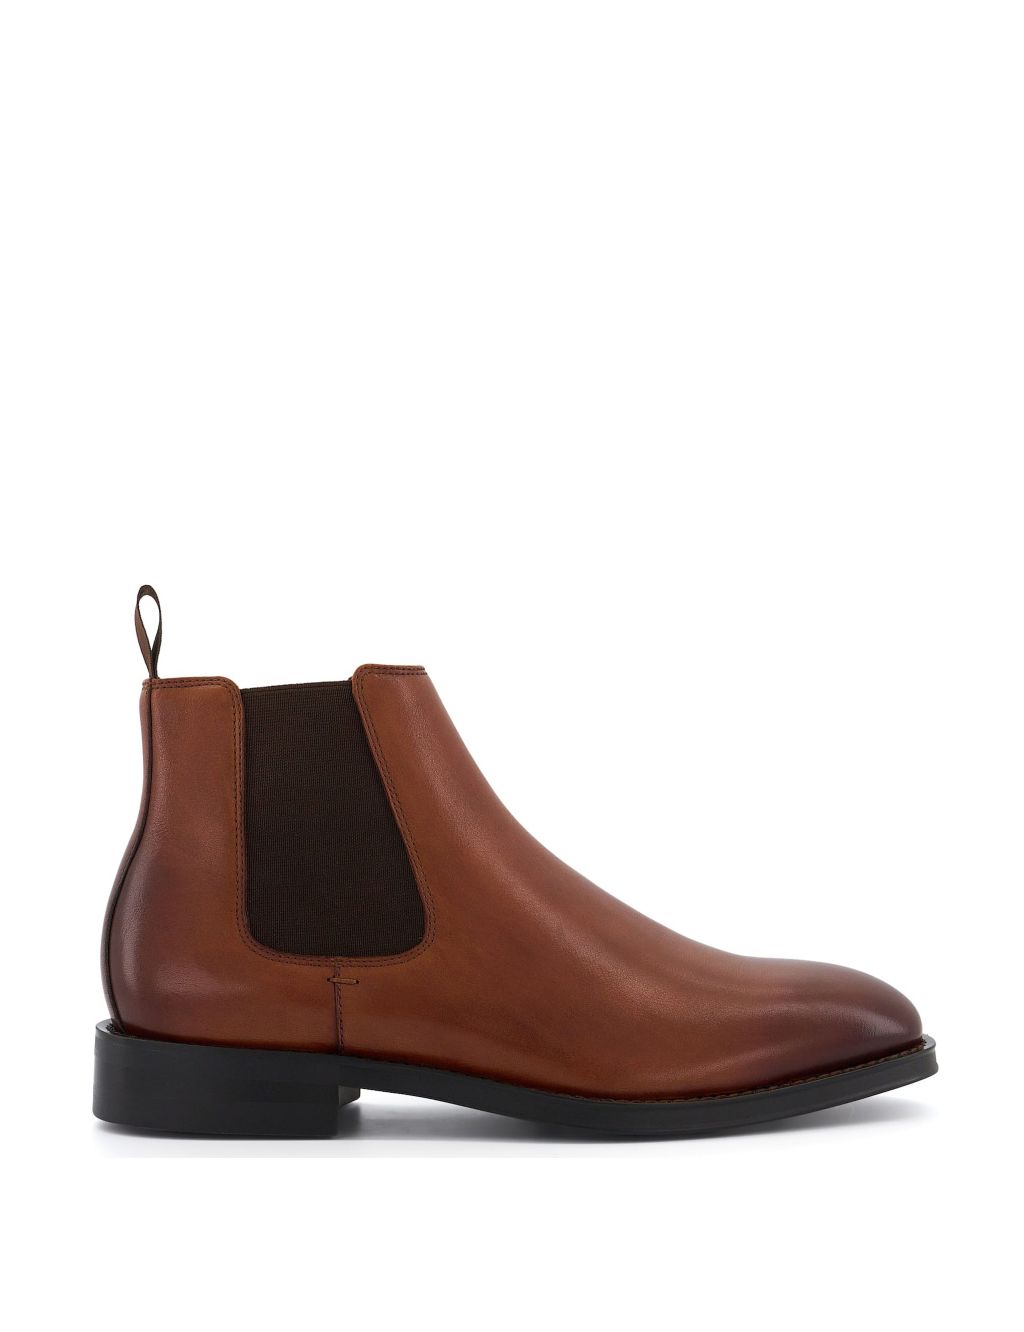 Suede Chelsea Boots image 1